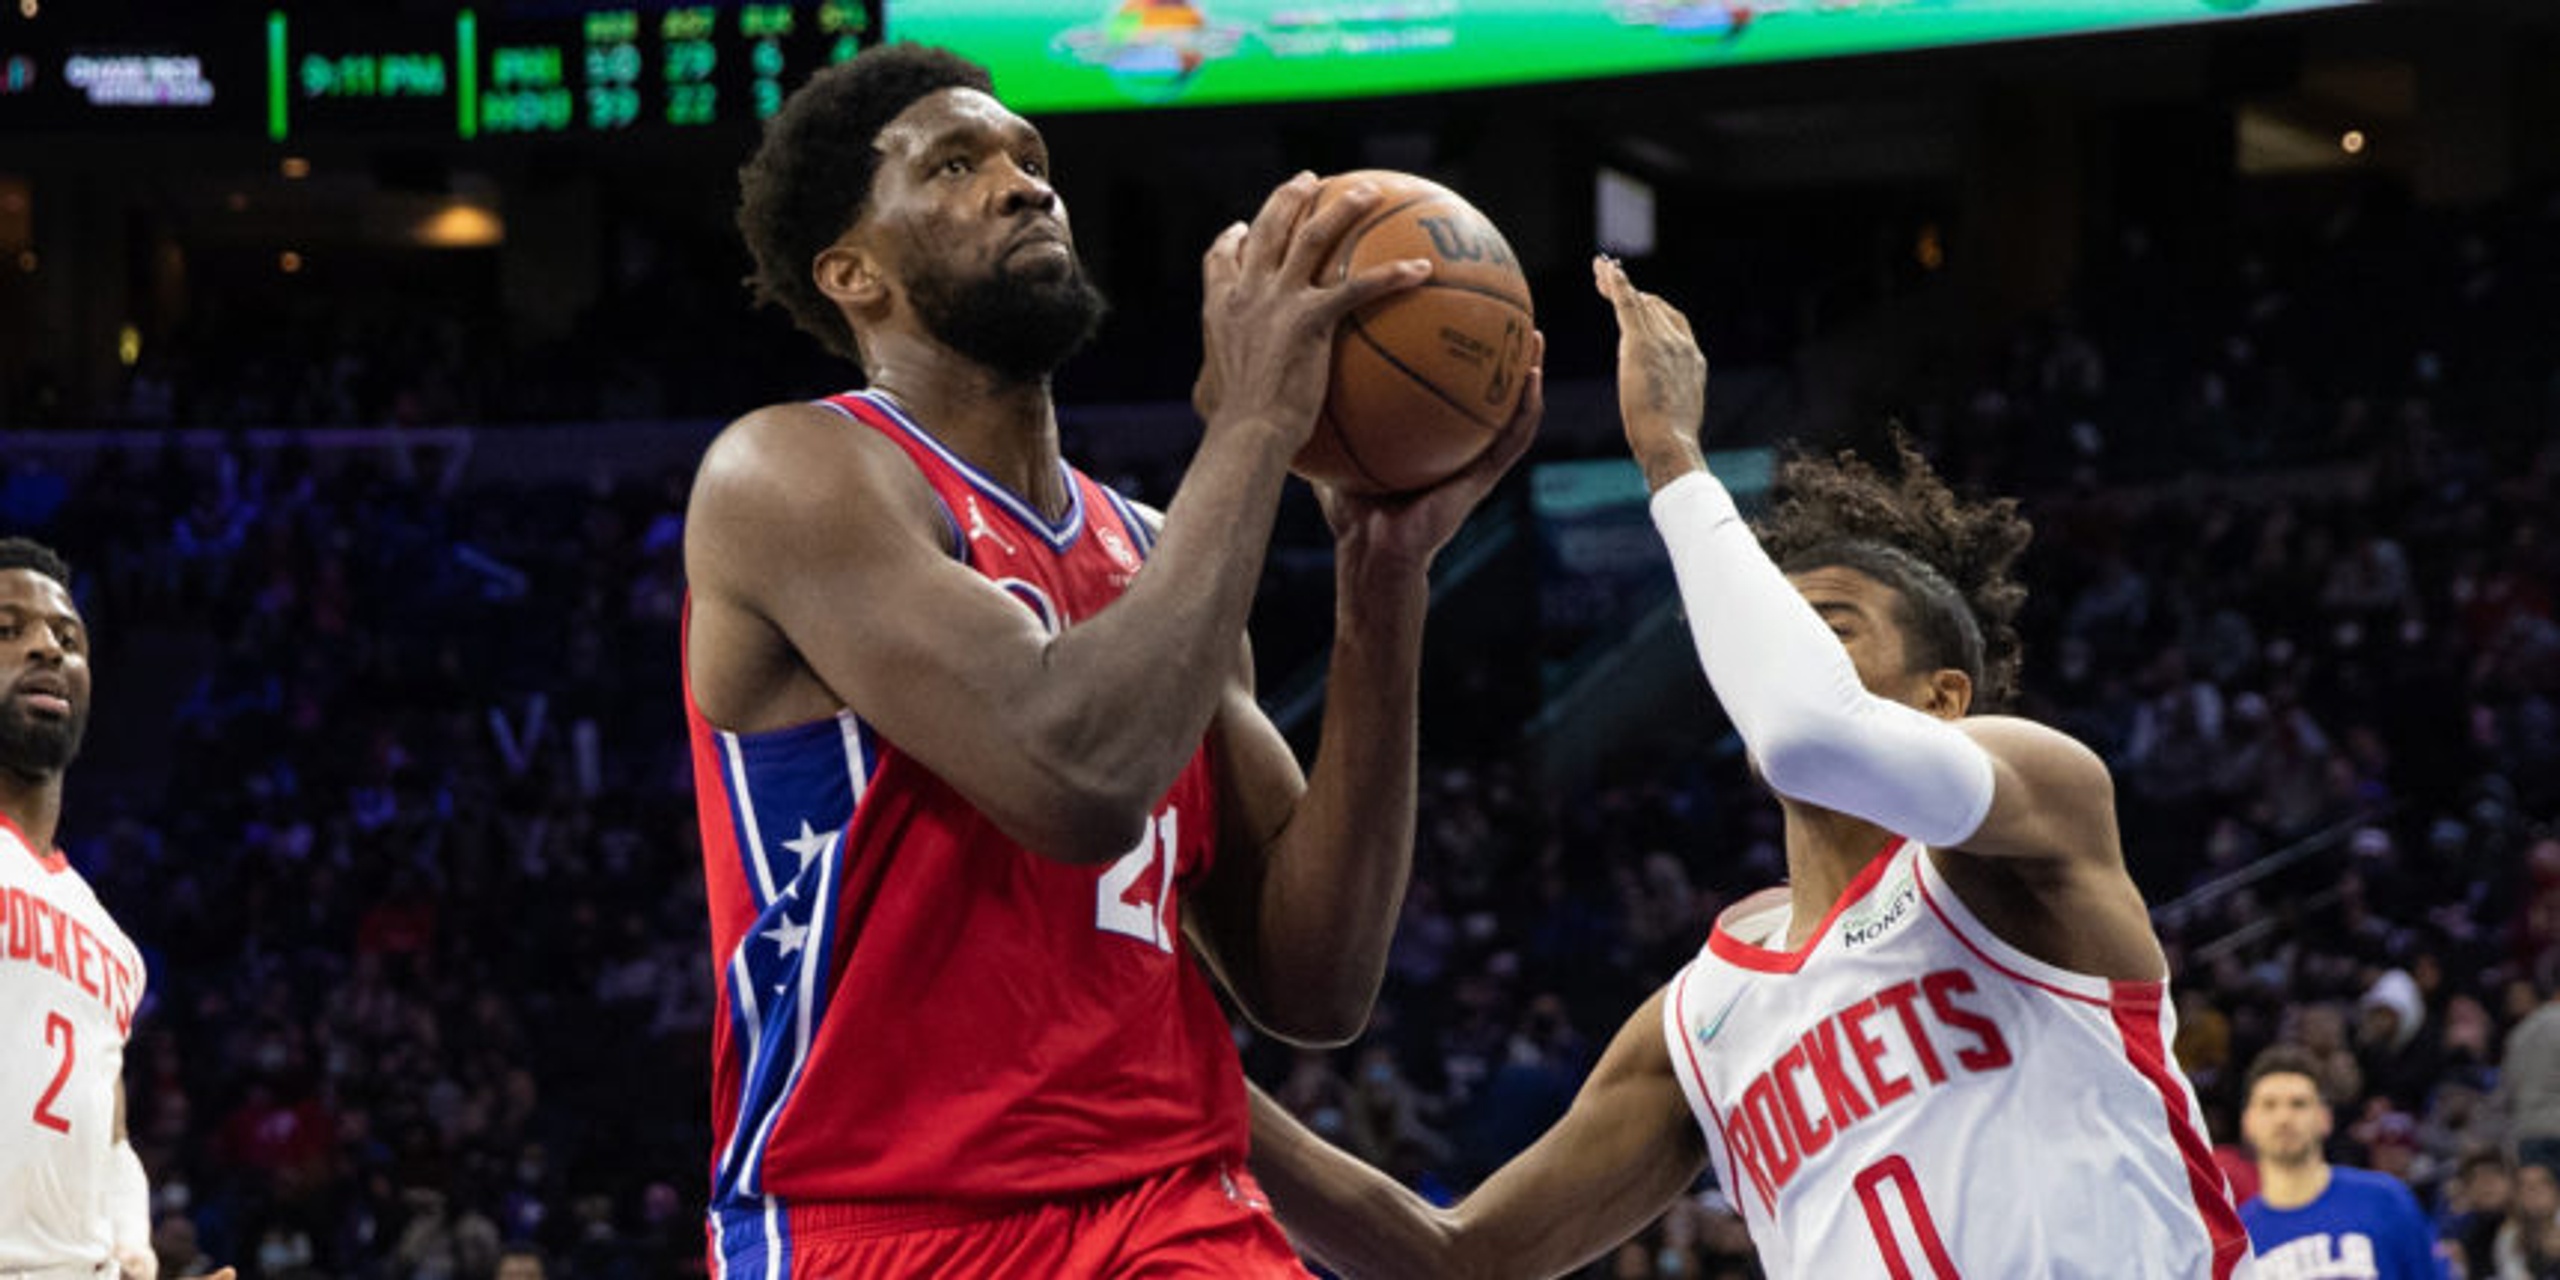 Embiid's triple-double powers 76ers past Rockets 133-113